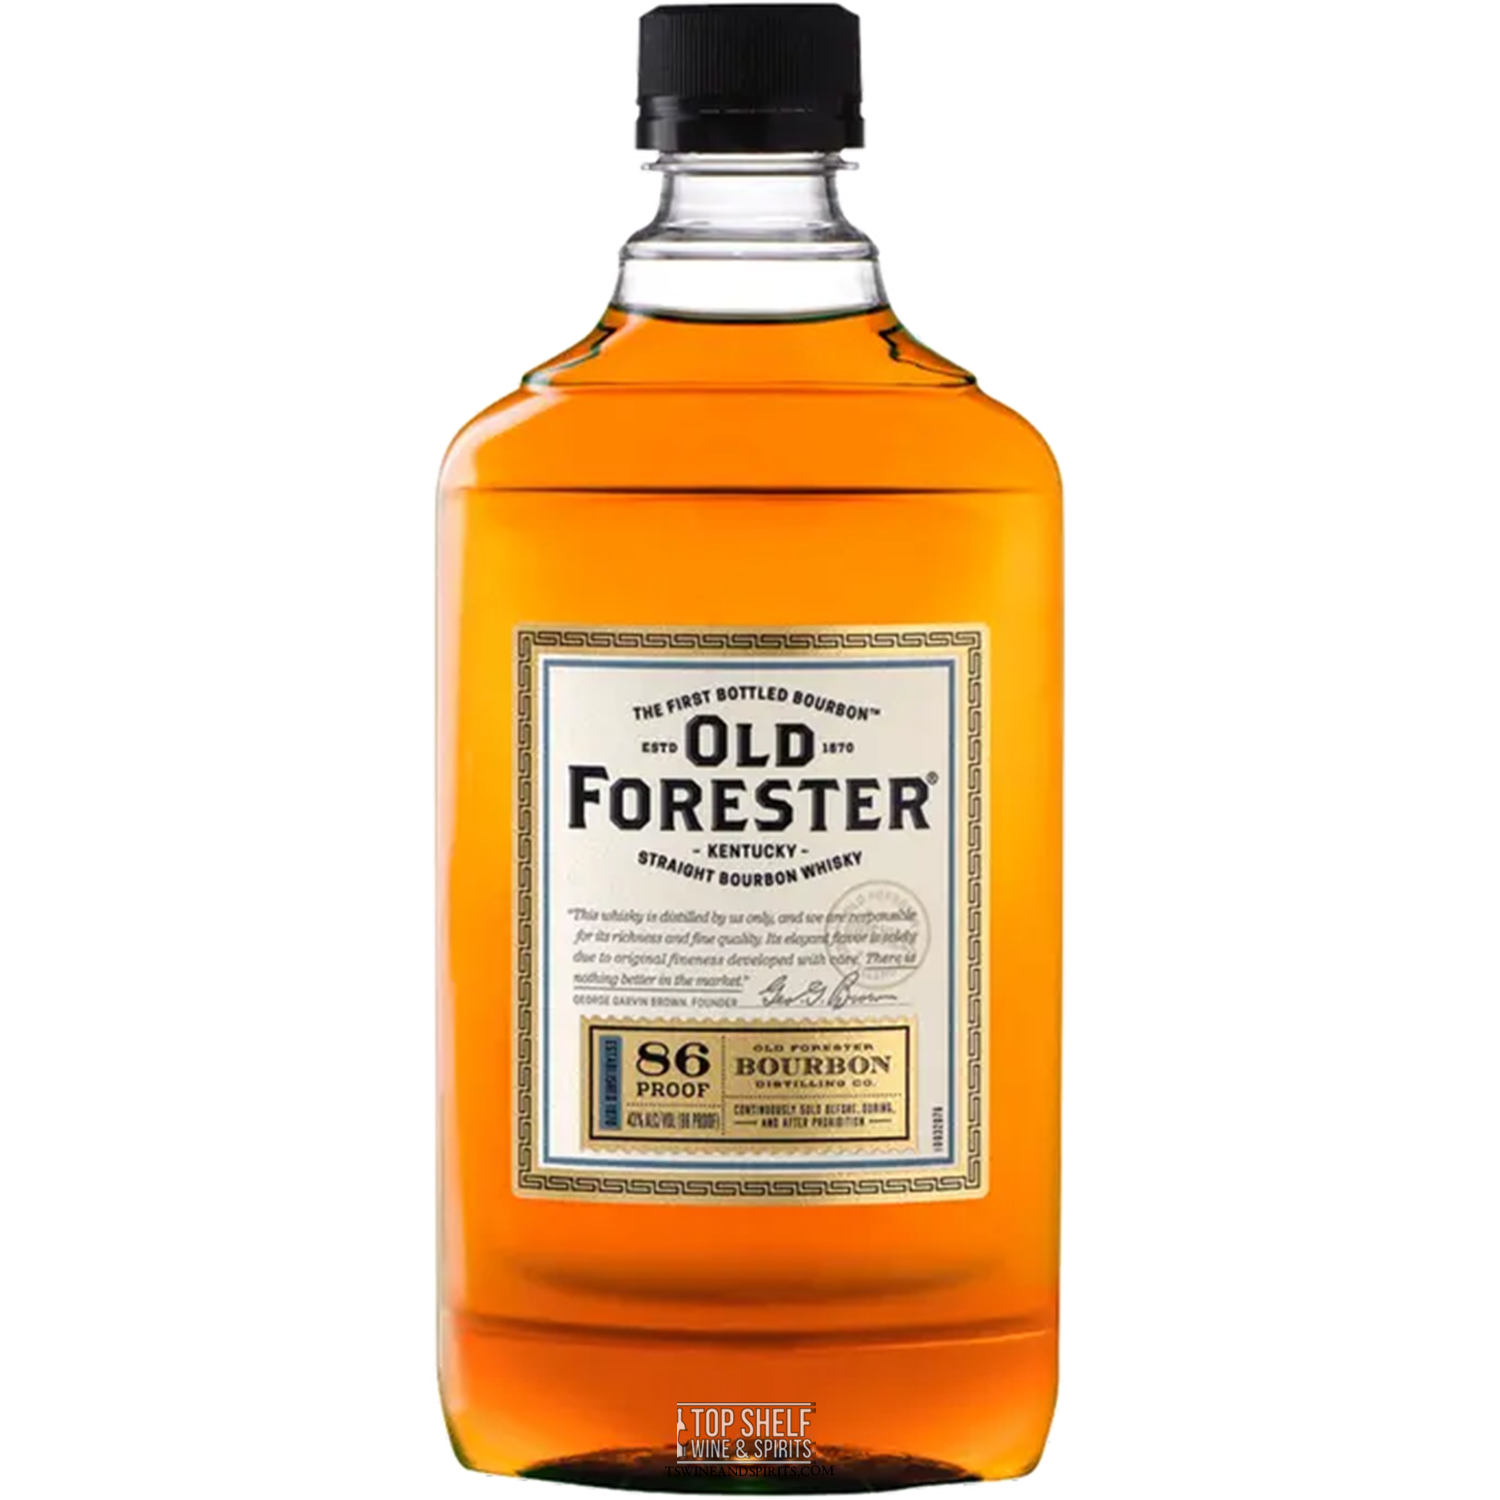 Old Forester Kentucky Straight Bourbon (86 Proof) 375mL